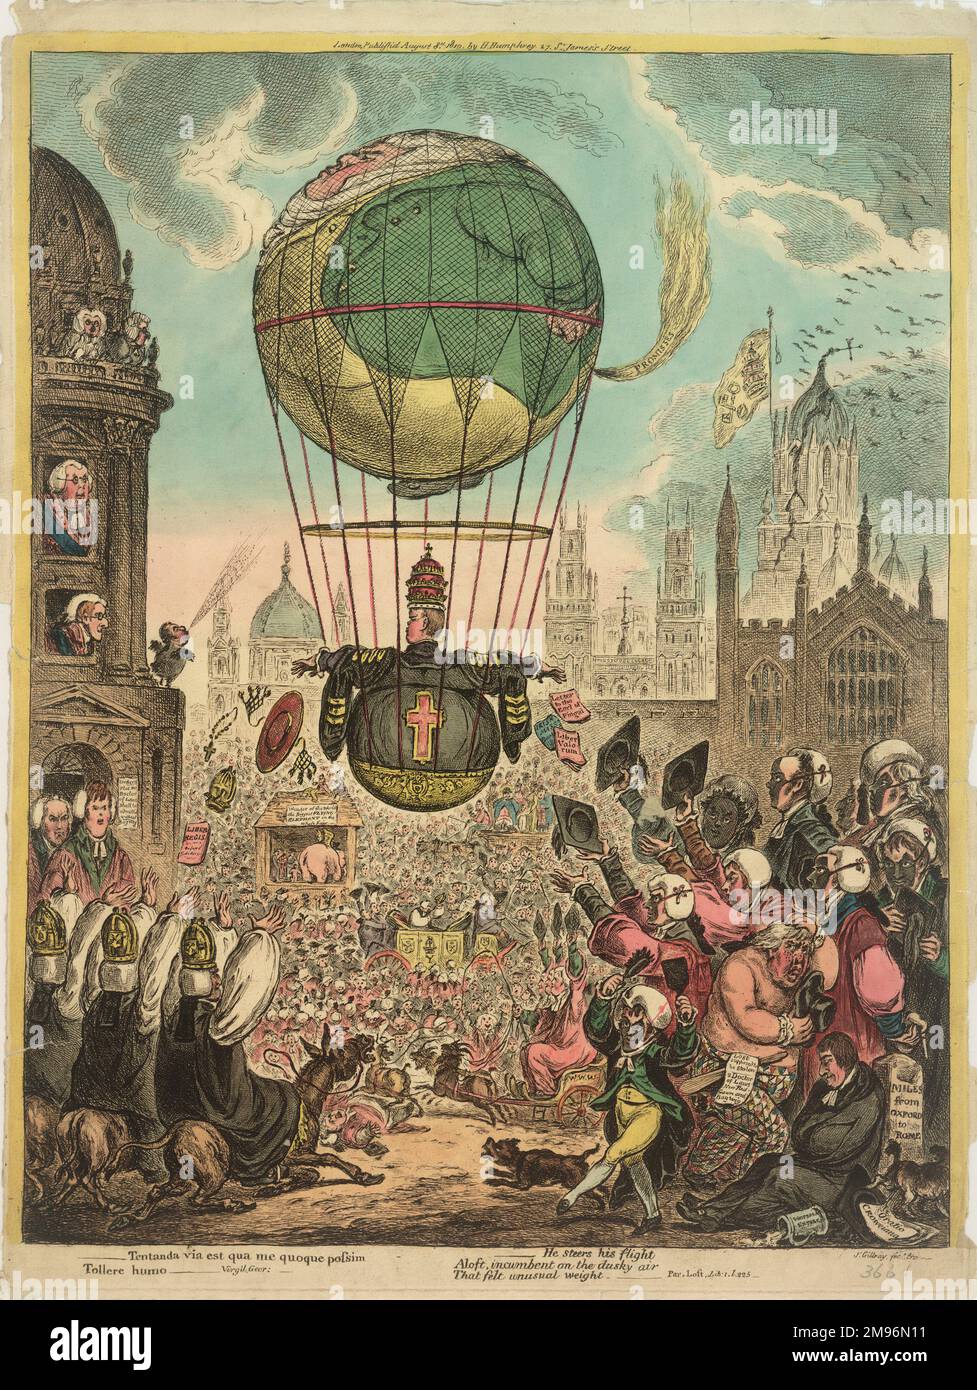 He Steers His Flight.  Satirical cartoon on the subject of Lord Grenville's installation as Chancellor of Oxford University.  He is seated in a balloon ascending into the air, wearing his Chancellor's gown, with a crucifix at the back. The balloon is depicted as a fat man with hot air (labelled Promises) escaping from behind.  The installation (3 July 1810) followed a divisive election in which Lord Eldon opposed Lord Grenville on political and religious grounds. Opponents like Gillray saw Grenville’s installation as a triumph for Catholic Emancipation.  Faces in the crowd include political Stock Photo